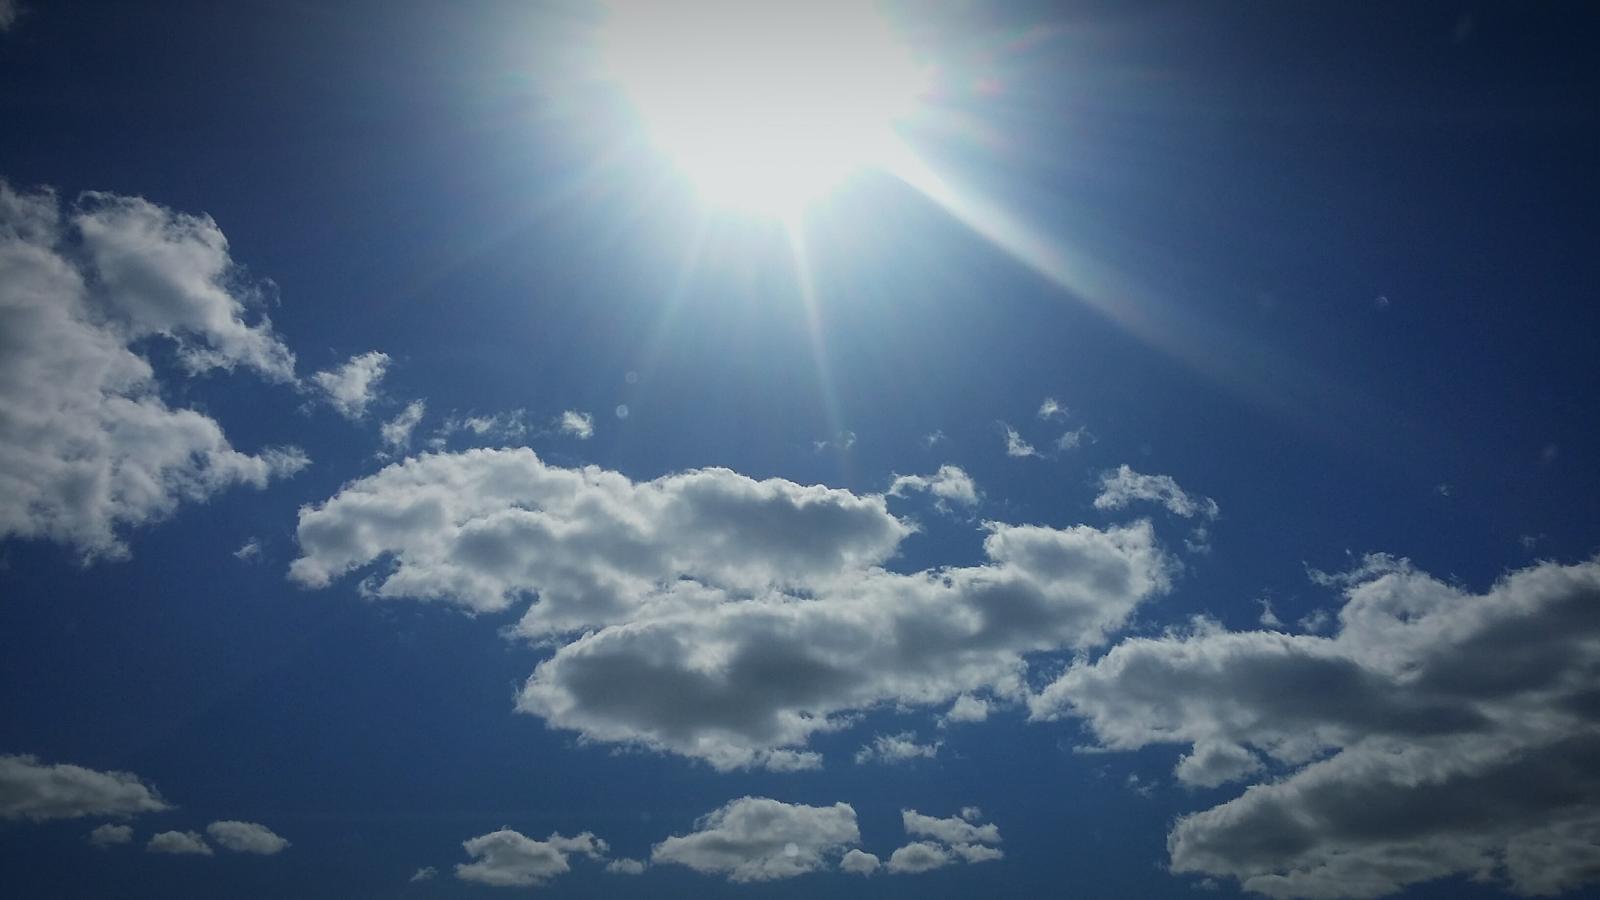 Monthly forecast: Lengthy hot, dry spell likely